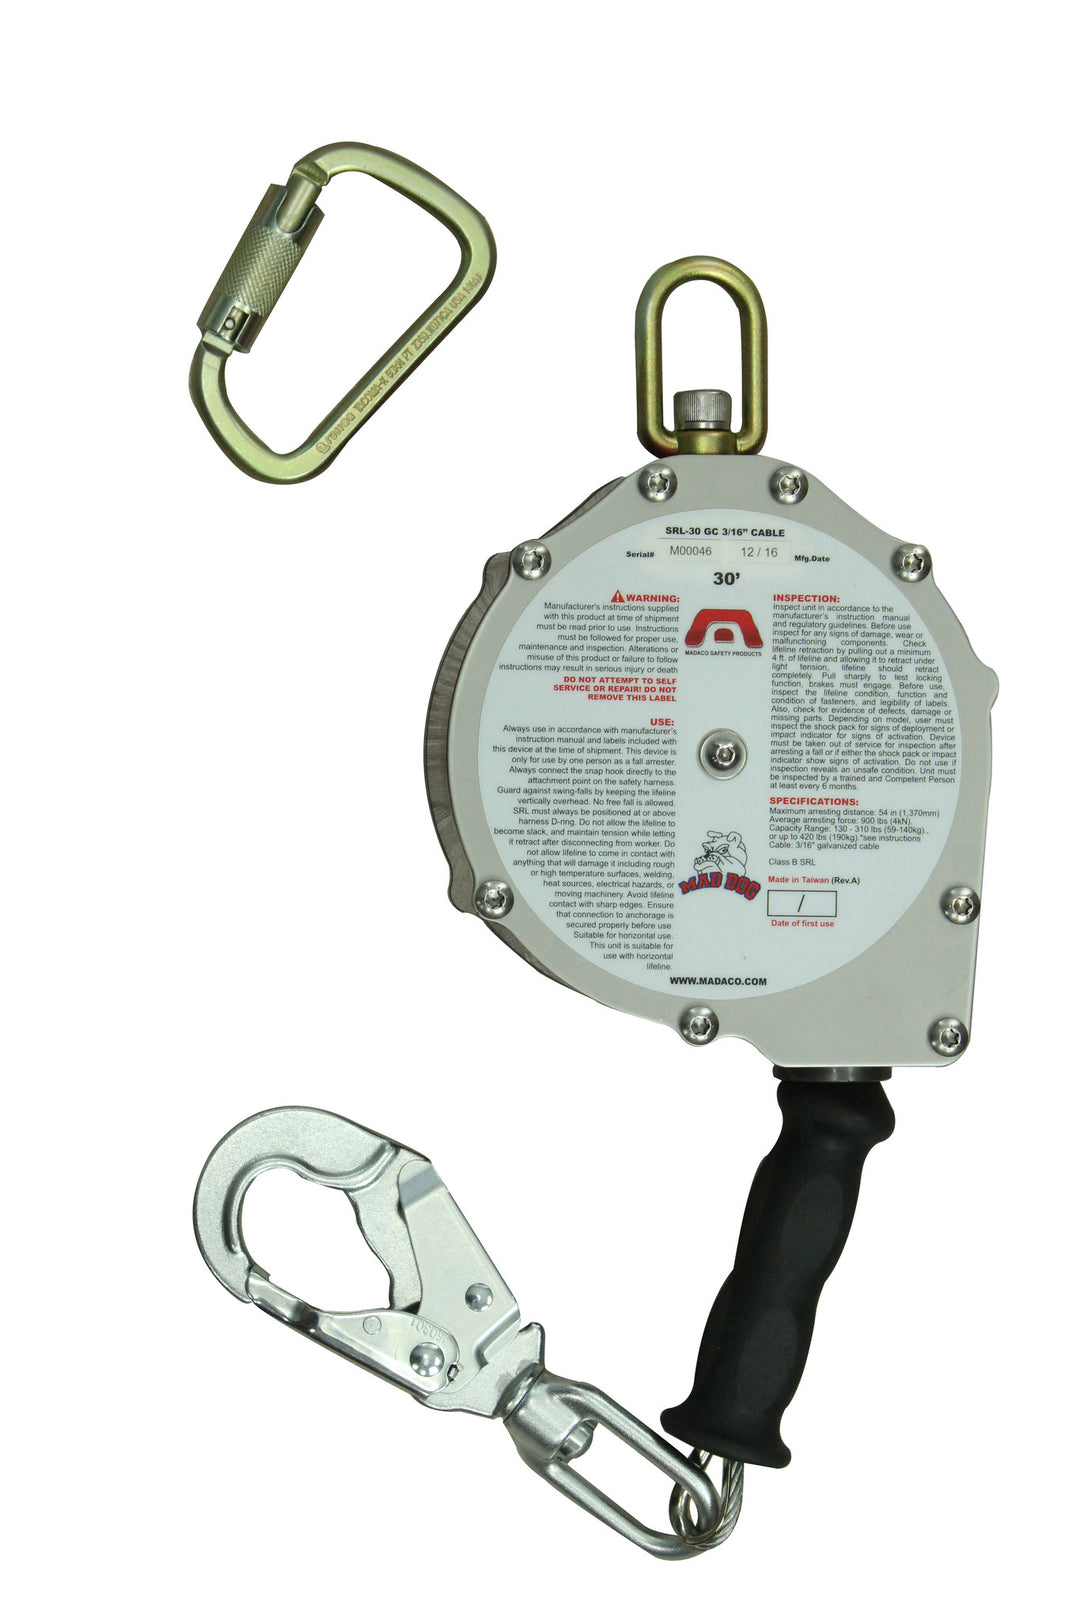 Mad Dog Self Retractable Lanyard 30 ft or 50 ft